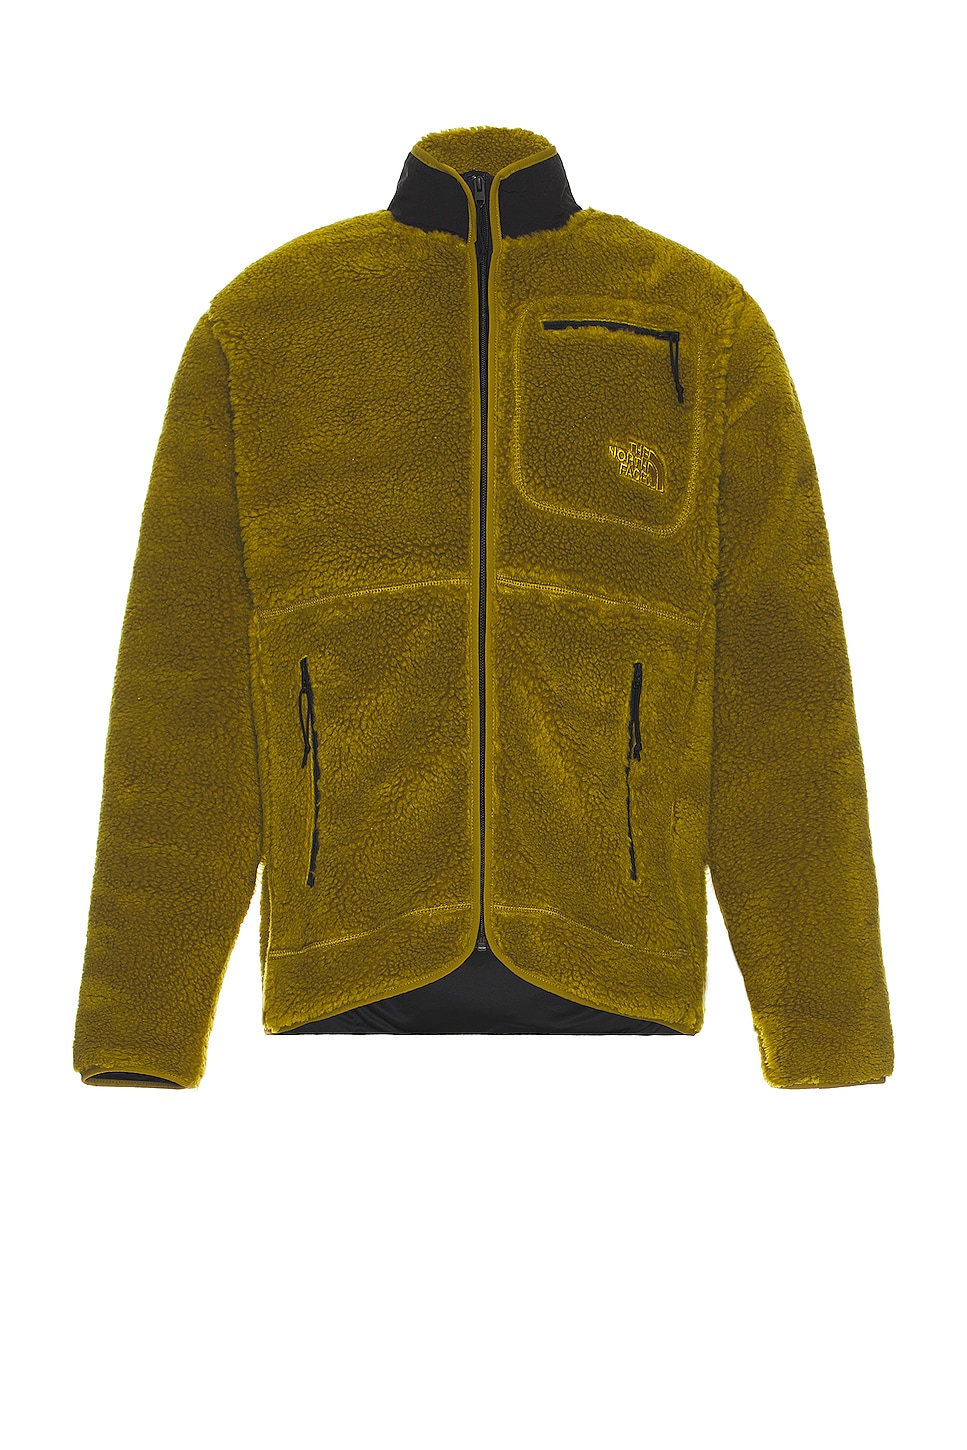 Image 1 of The North Face Extreme Pile Full Zip Jacket in Sulphur Moss